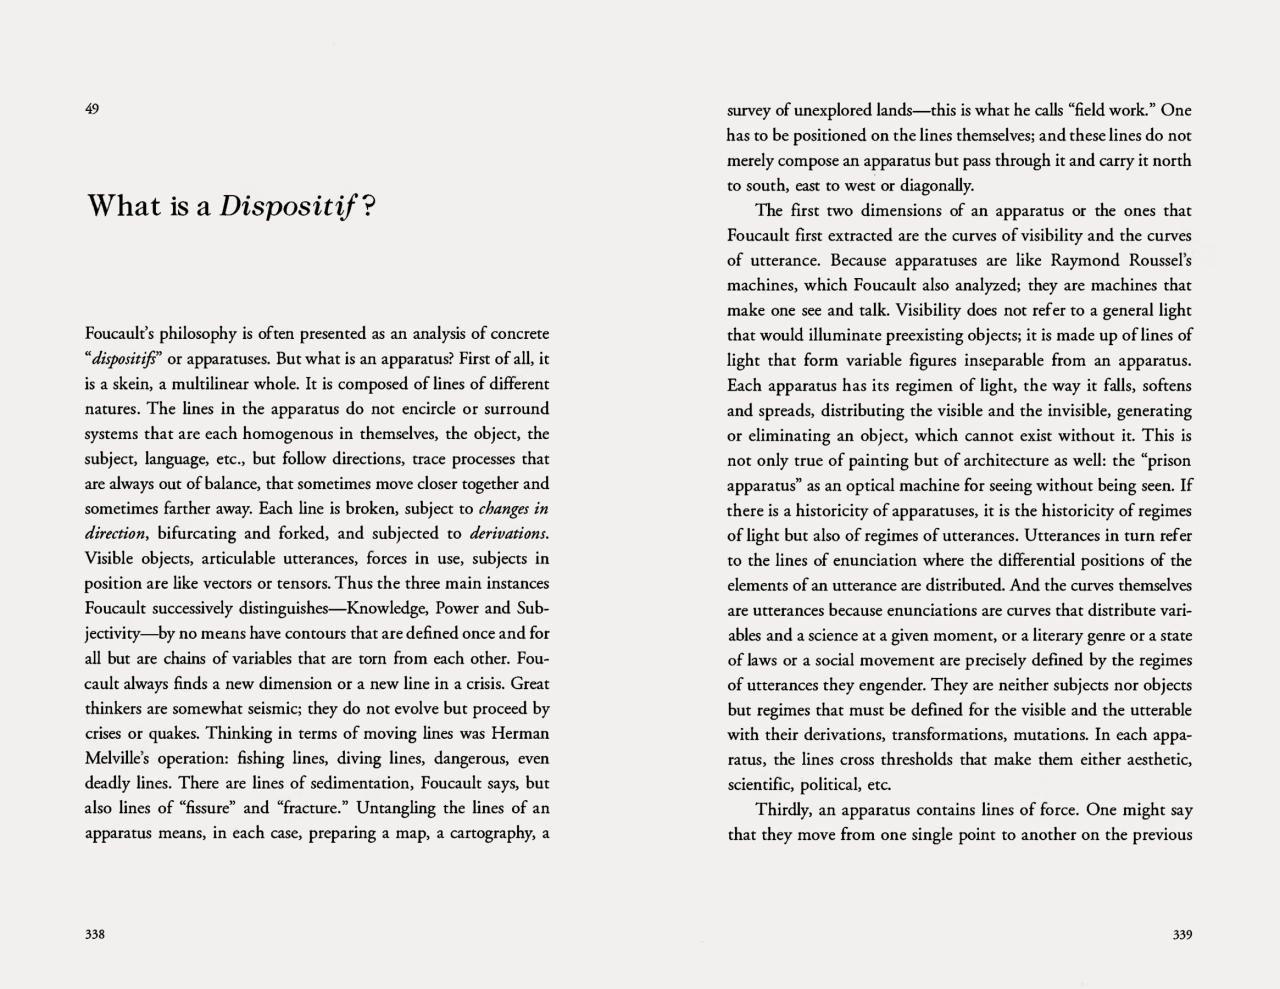 Gilles Deleuze, What is a Dispositif?, [Michel Foucault philosophe, Rencontre internationale, Paris, 9, 10, 11 janvier 1988; Seuil, Paris, 1989], in Two Regimes of Madness. Texts and Interviews 1975-1995, Edited by David Lapoujade, Translated by Ames Hodges and Mike Taormina, Semiotext(e), Columbia University, New York, NY, 2006, pp. 338-348 #graphic design#philosophy#conference#book#gilles deleuze#michel foucault#david lapoujade#ames hodges#mike taormina#semiotext(e)#1980s#2000s